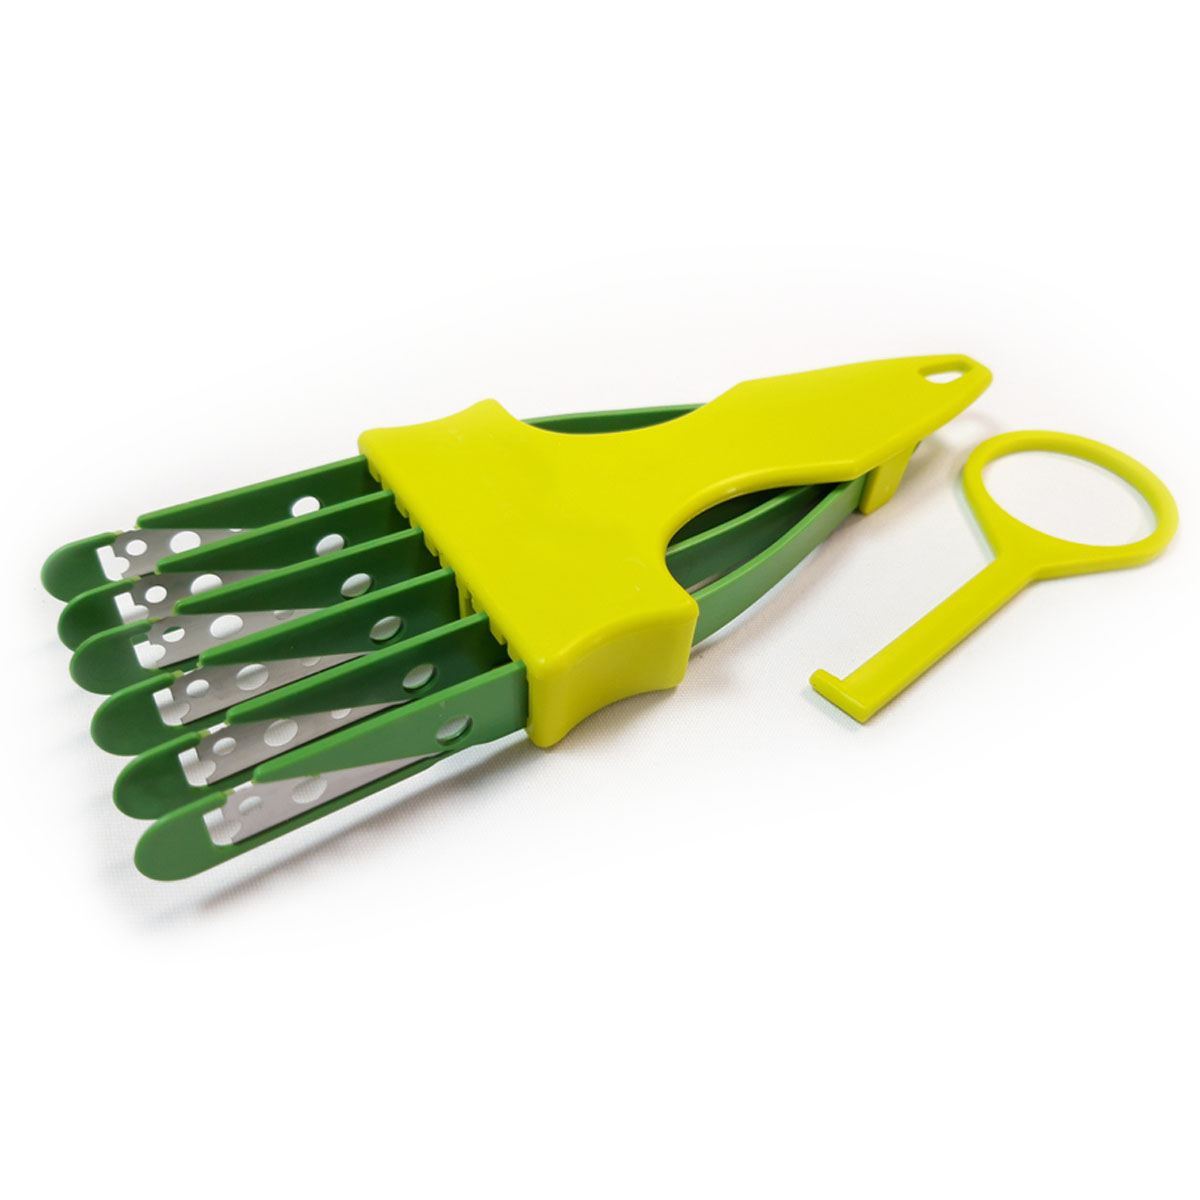 Multi Blade Scoring Tool Griffe with 6 Green Grignettes